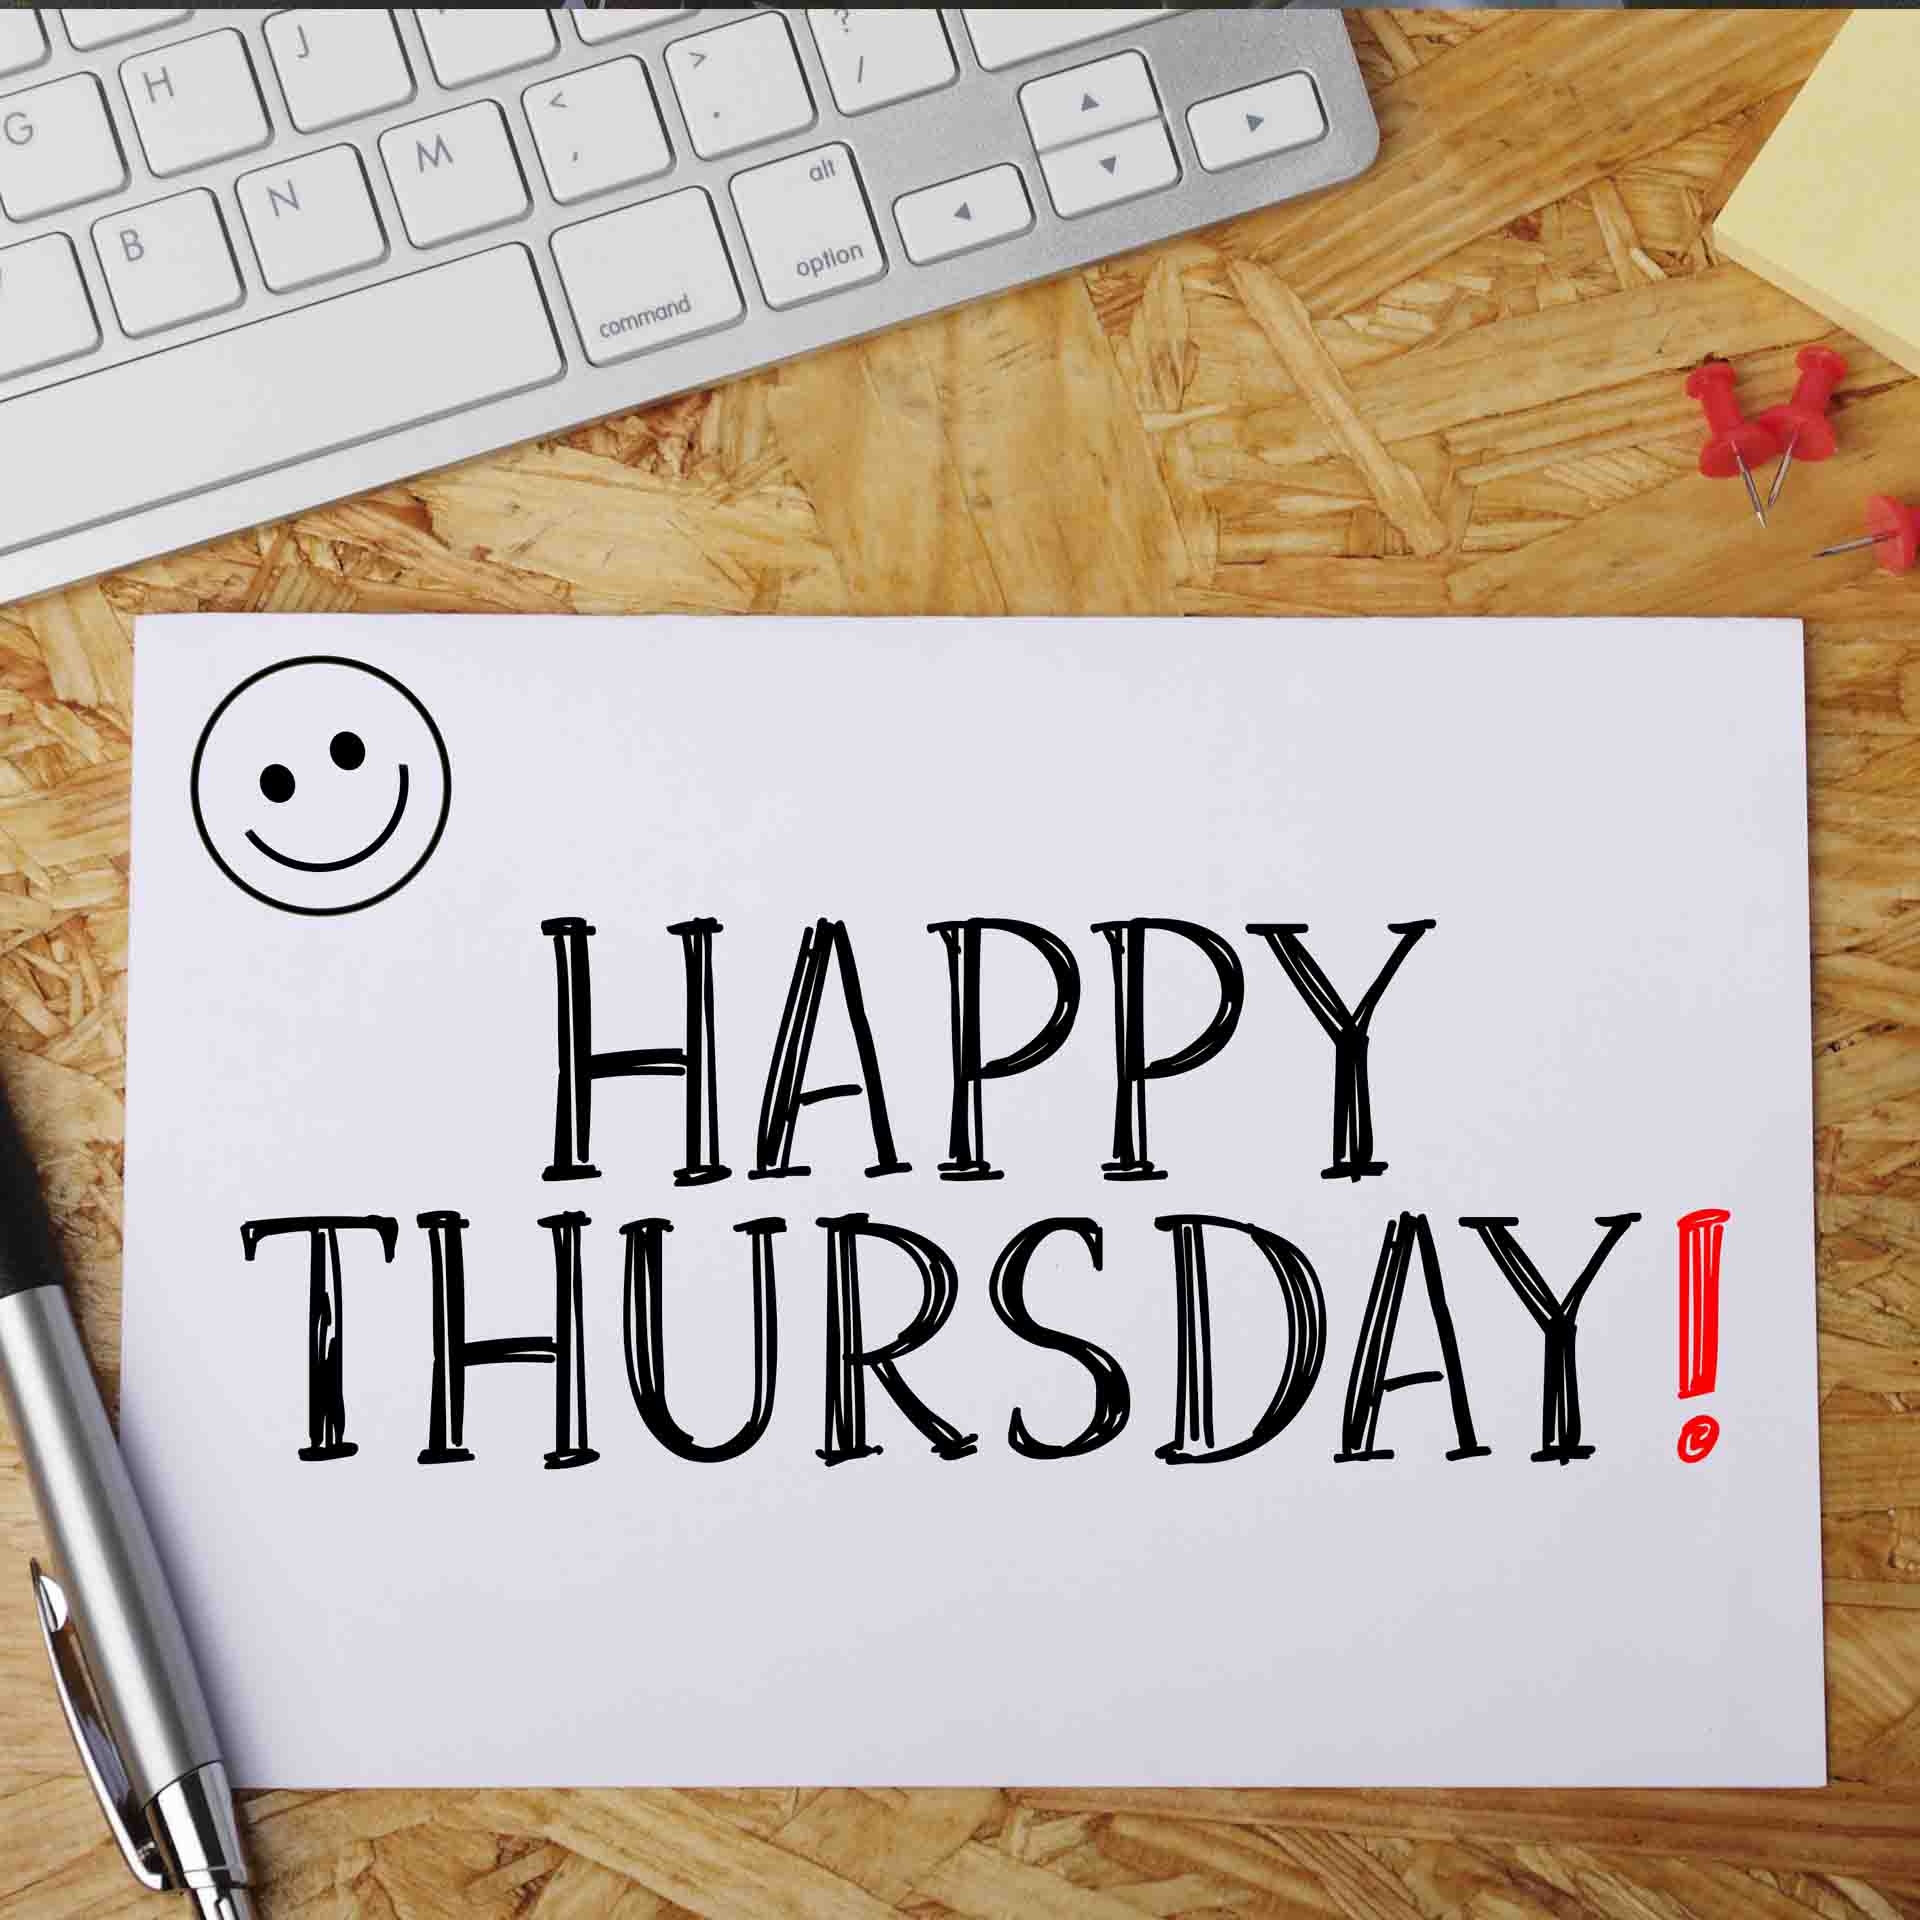 Happy Thursday: Best Wishes, Quotes, and Great Messages ...